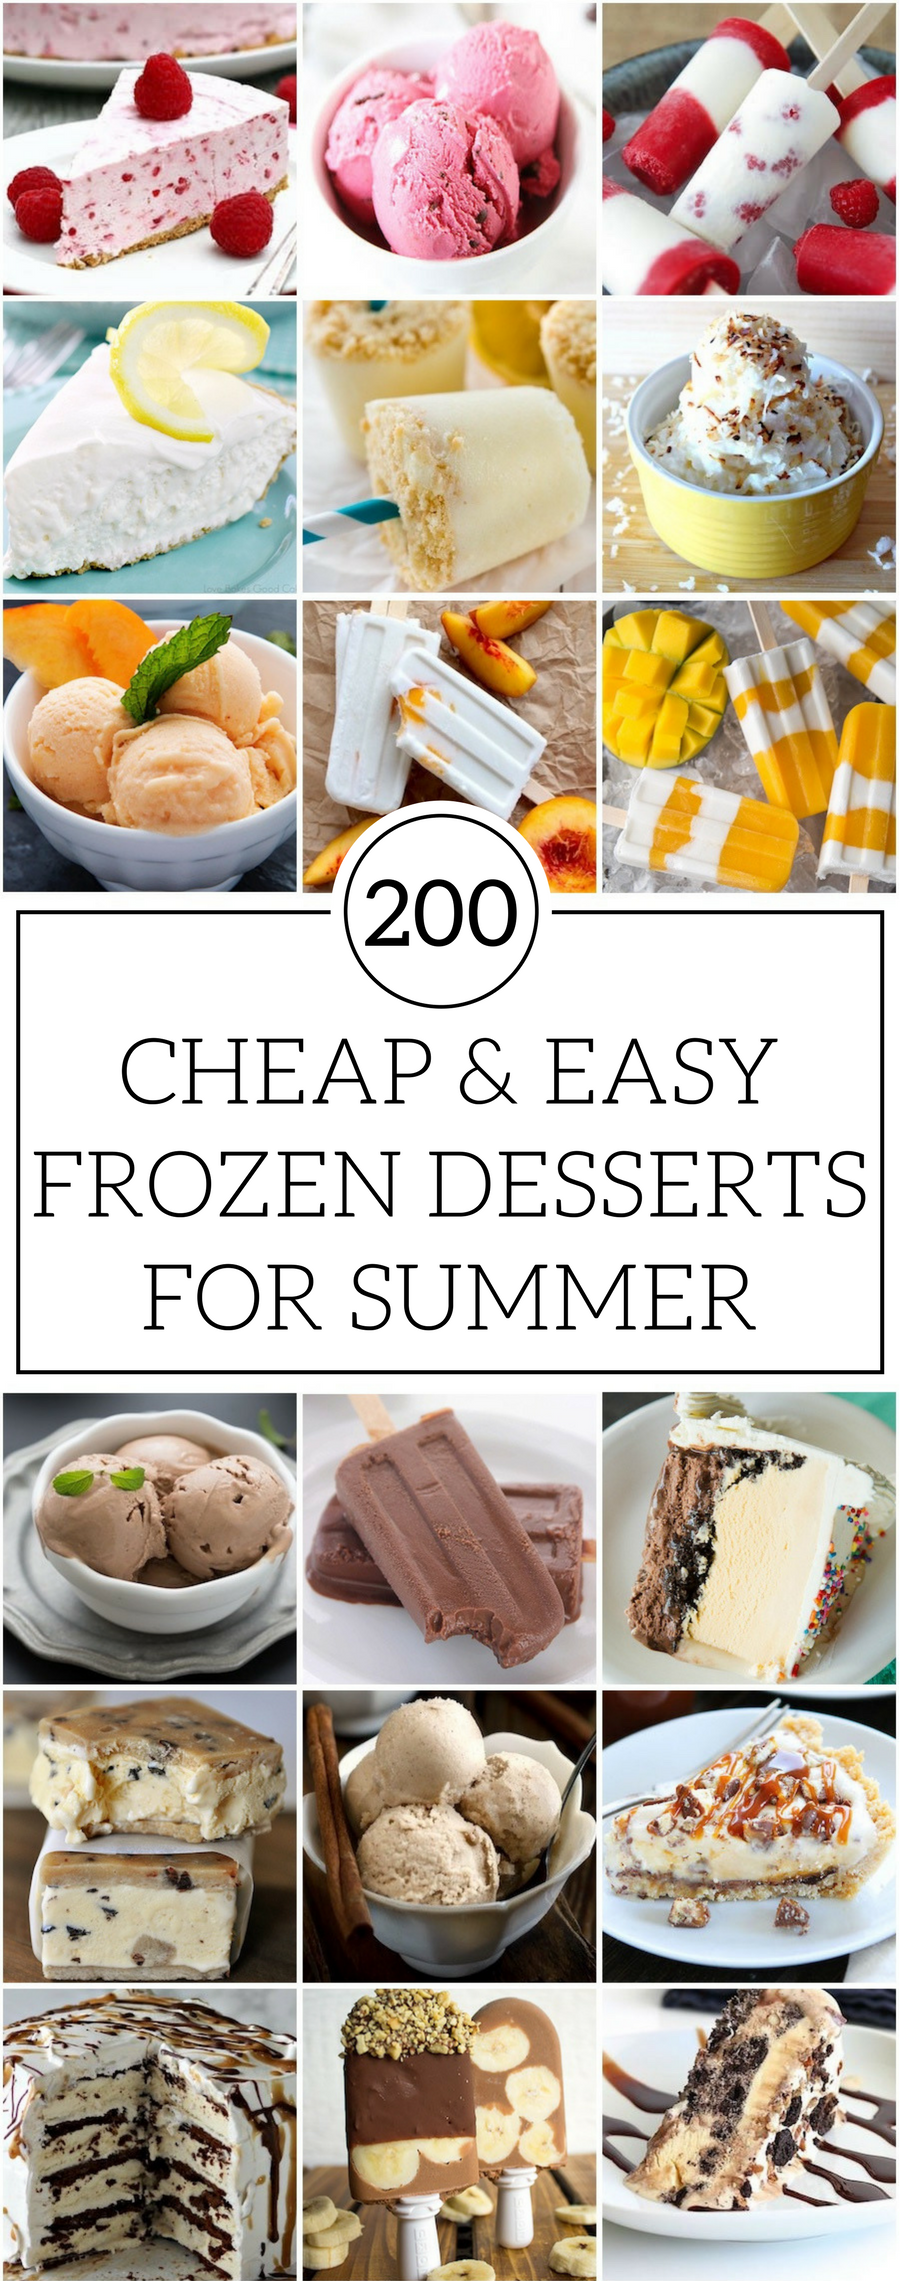 200 Cheap and Easy Frozen Desserts for Summer - Prudent Penny Pincher